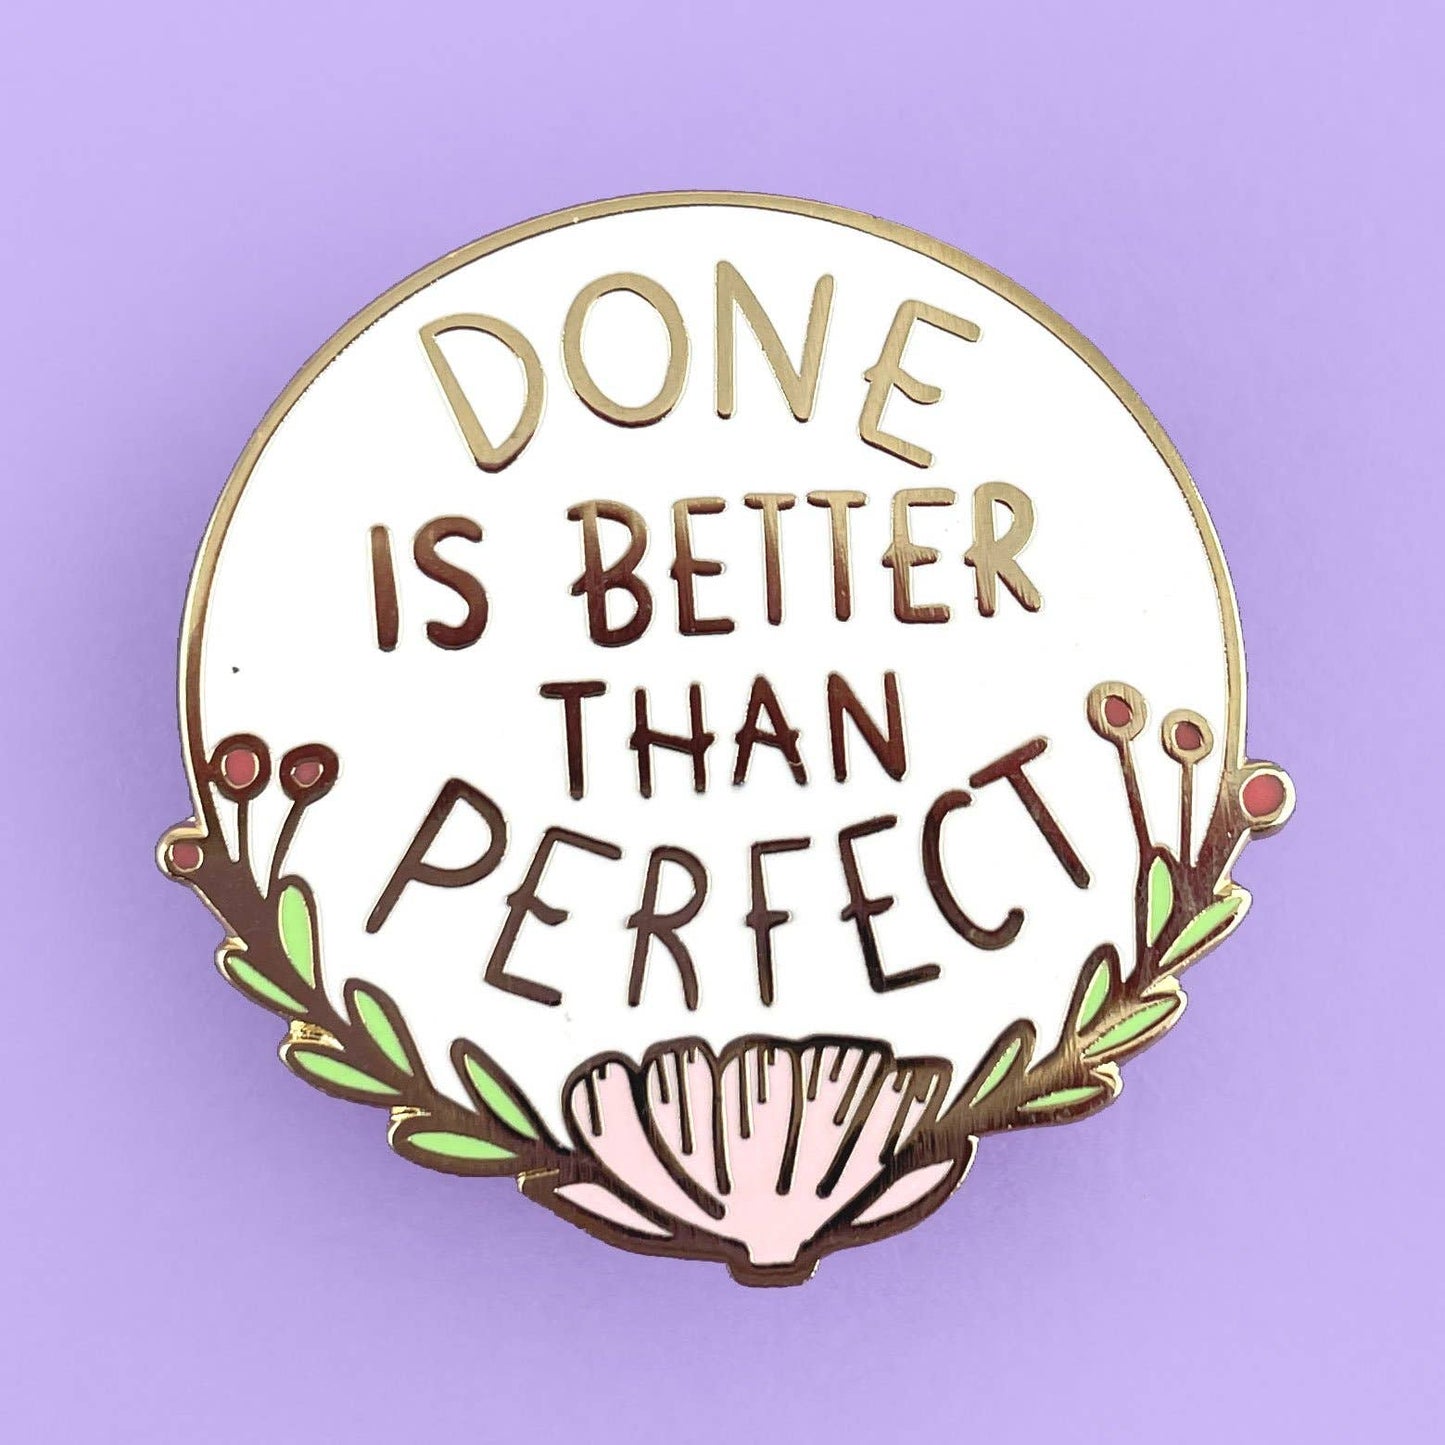 Jubly-Umph 'Done Is Better Than Perfect' Enamel Lapel Pin